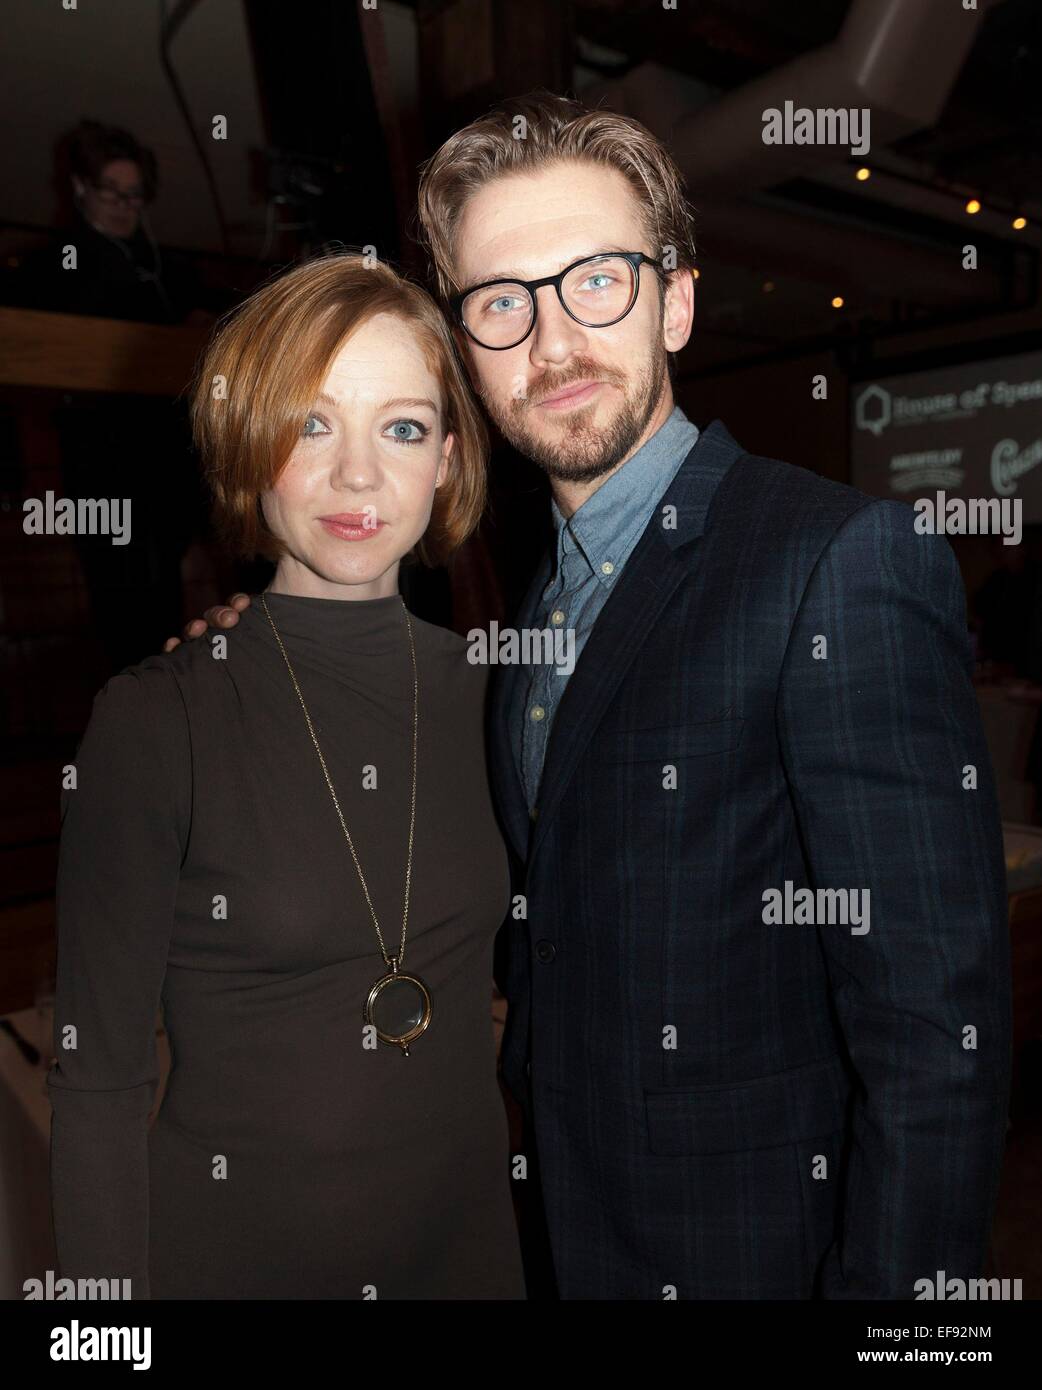 Susie Hariet, Dan Stevens at arrivals for 2015 House of SpeakEasy Gala, City Winery, New York, NY January 28, 2015. Photo By: Lev Radin/Everett Collection Stock Photo